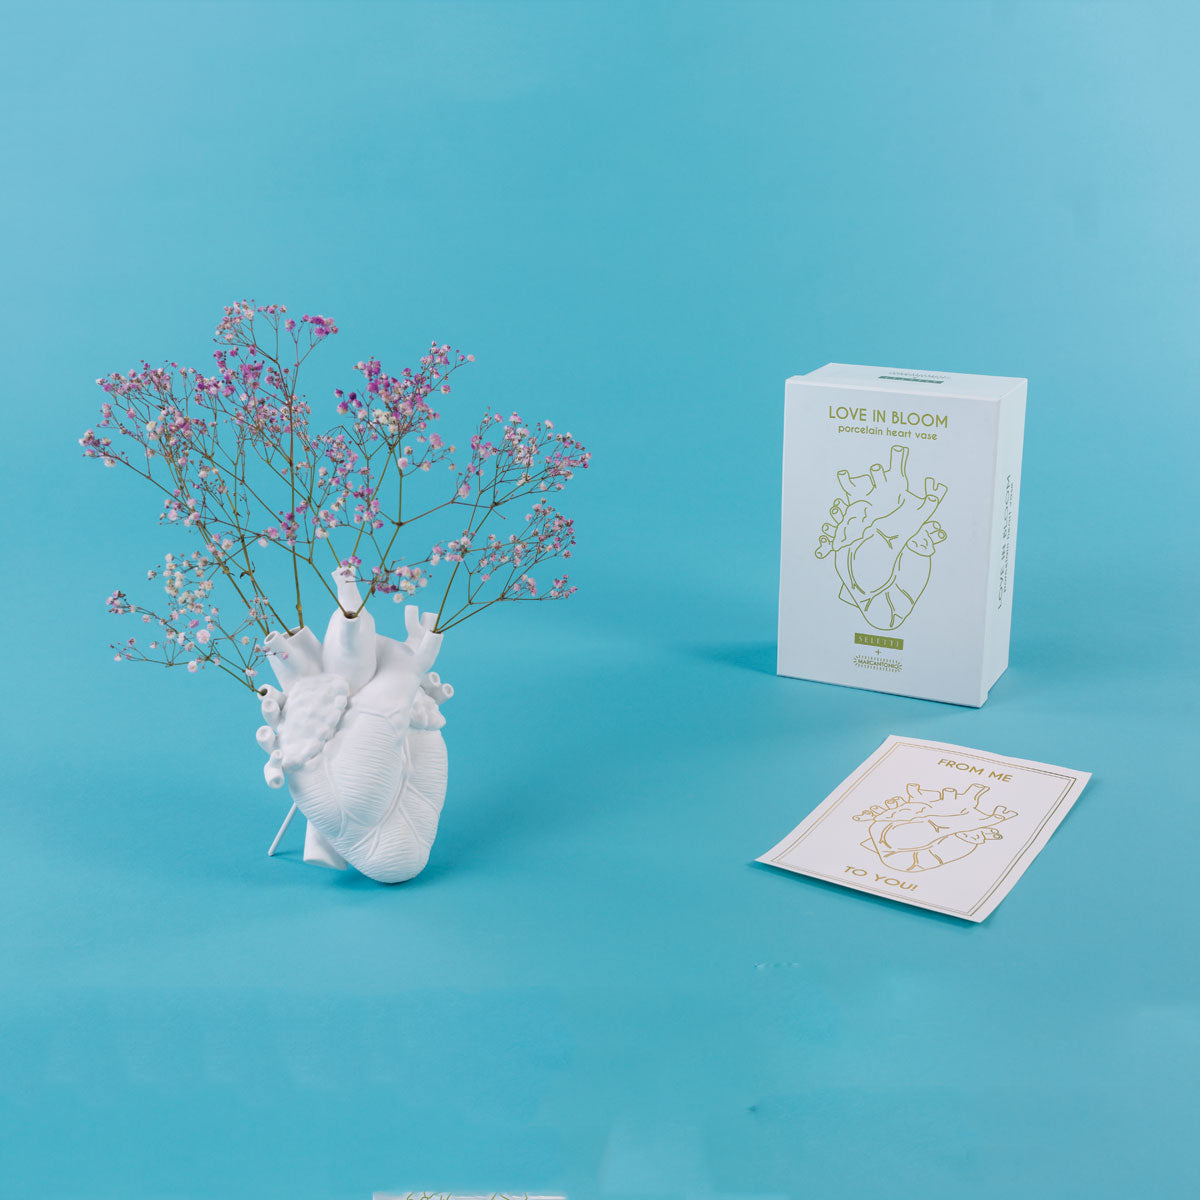 'Love in Bloom' white heart vase by Seletti. With packaging. 